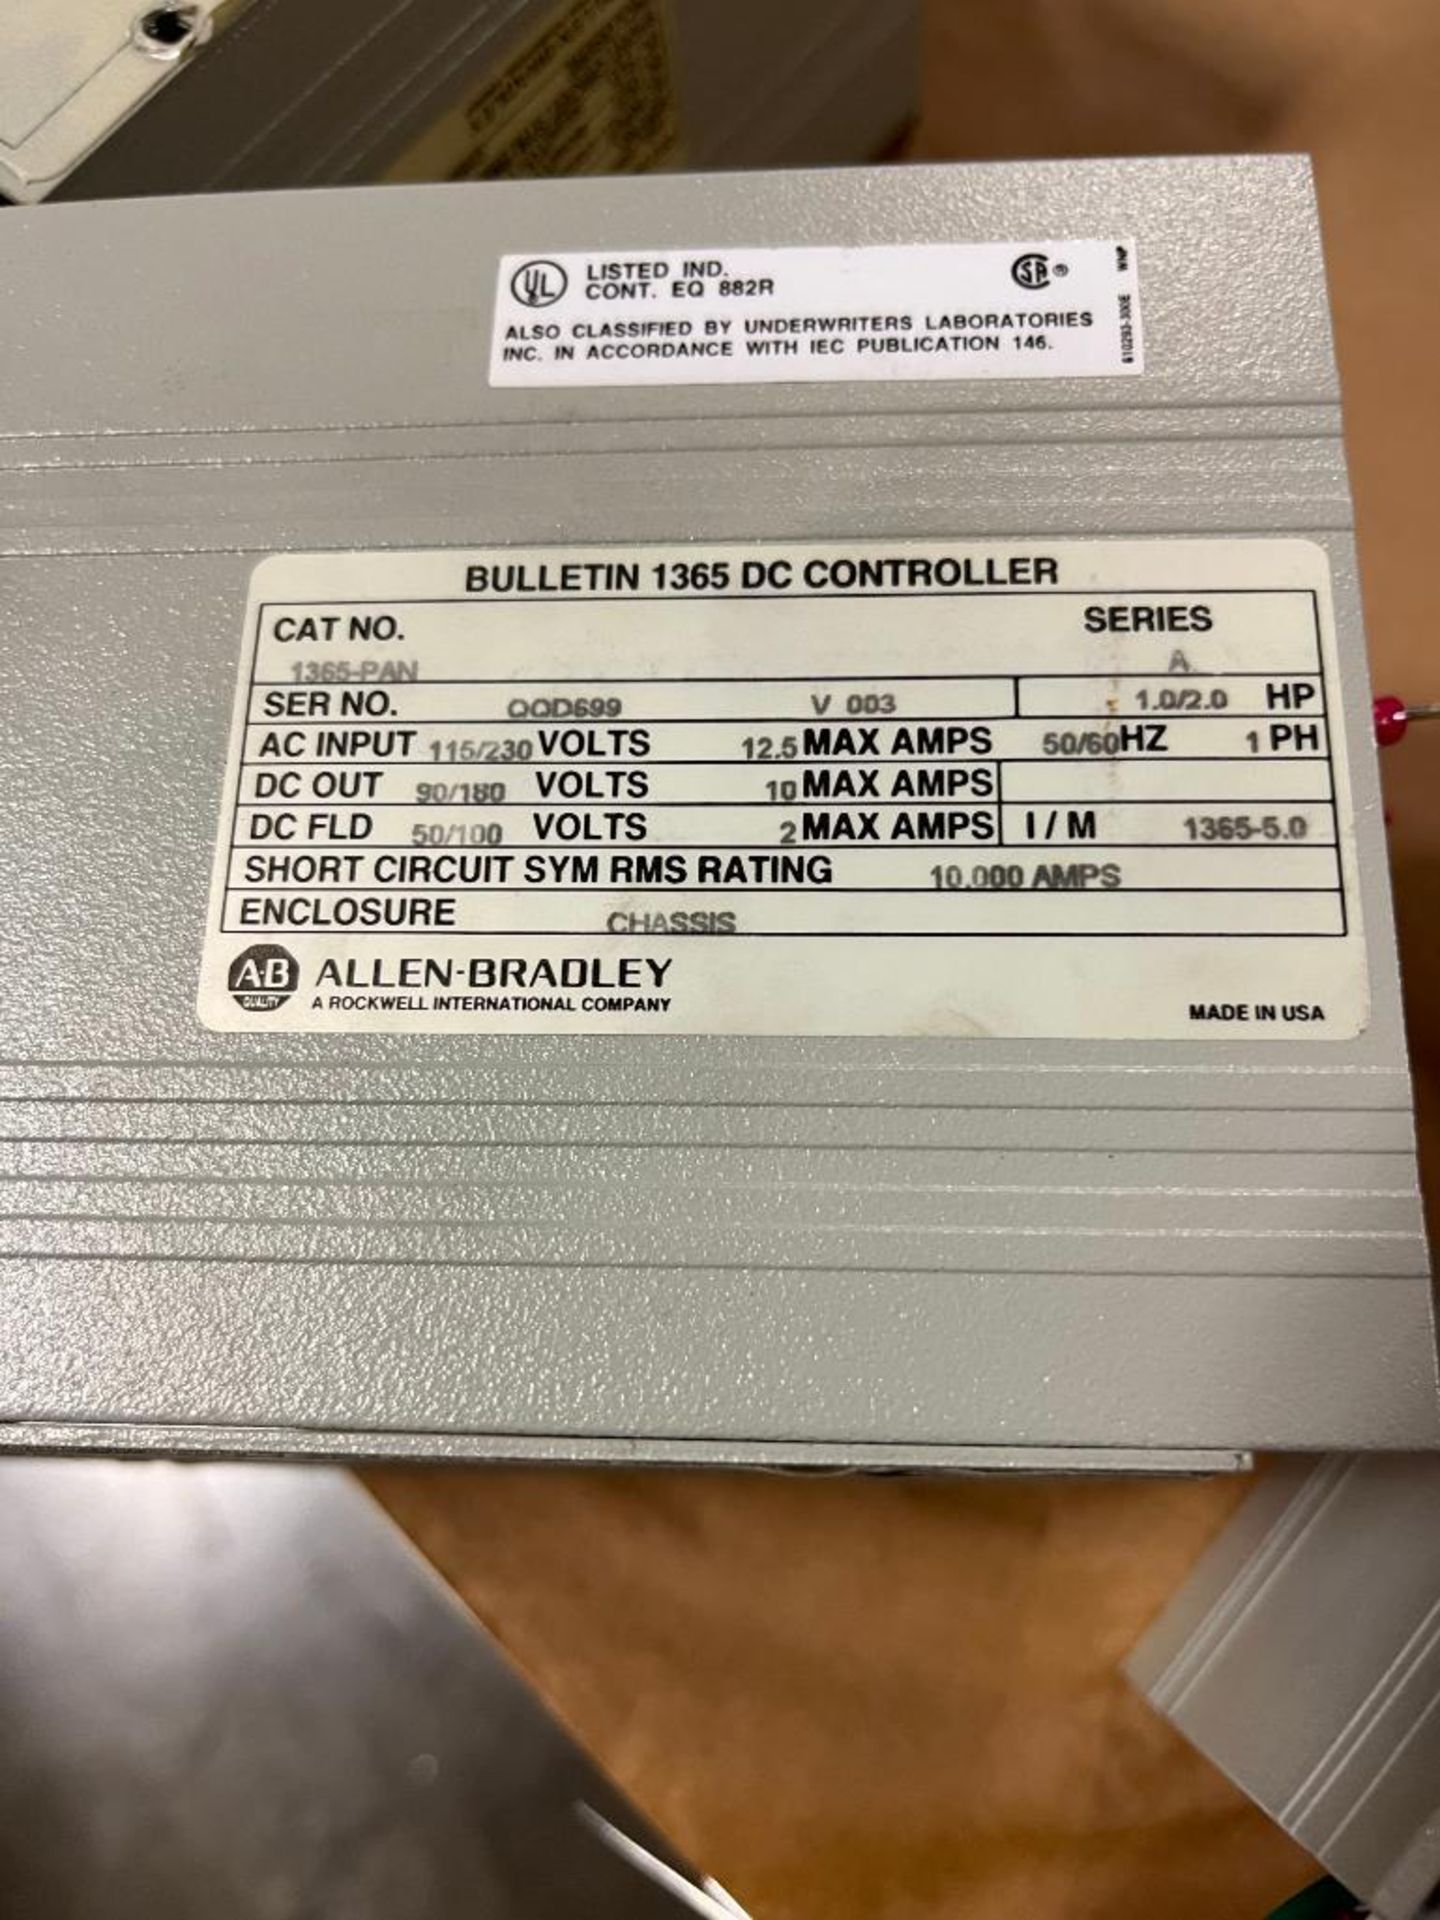 (2x) Allen-Bradley Bulletin 1365 DC Controllers, Catalog Number 1365-PAN, Series A, Single-Phase, 23 - Image 3 of 3